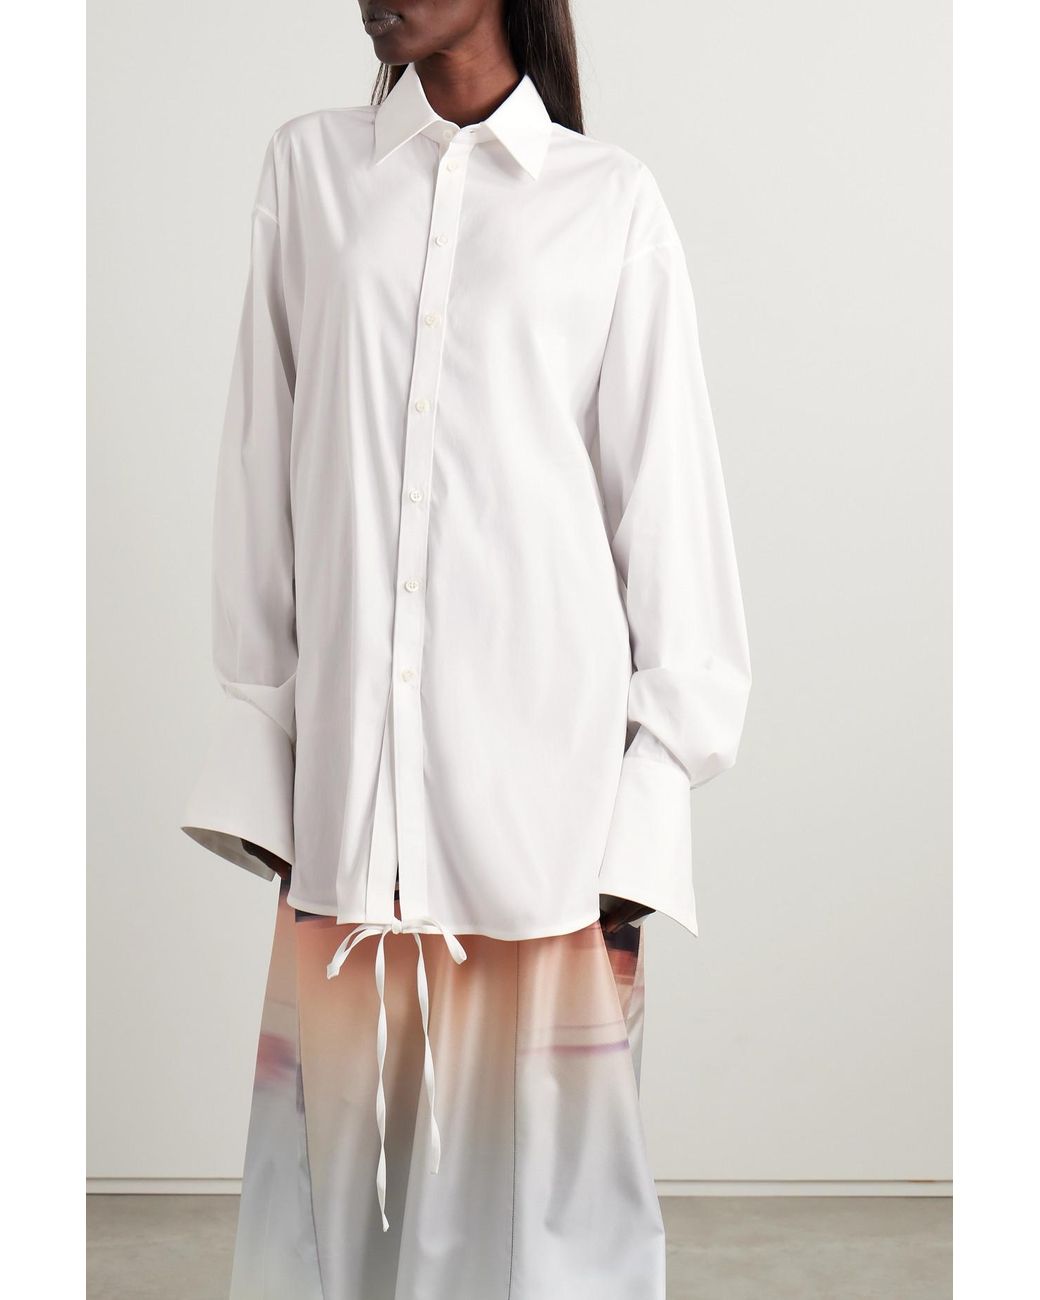 Peter Do Convertible Cotton-blend Sateen Shirt in White | Lyst Canada